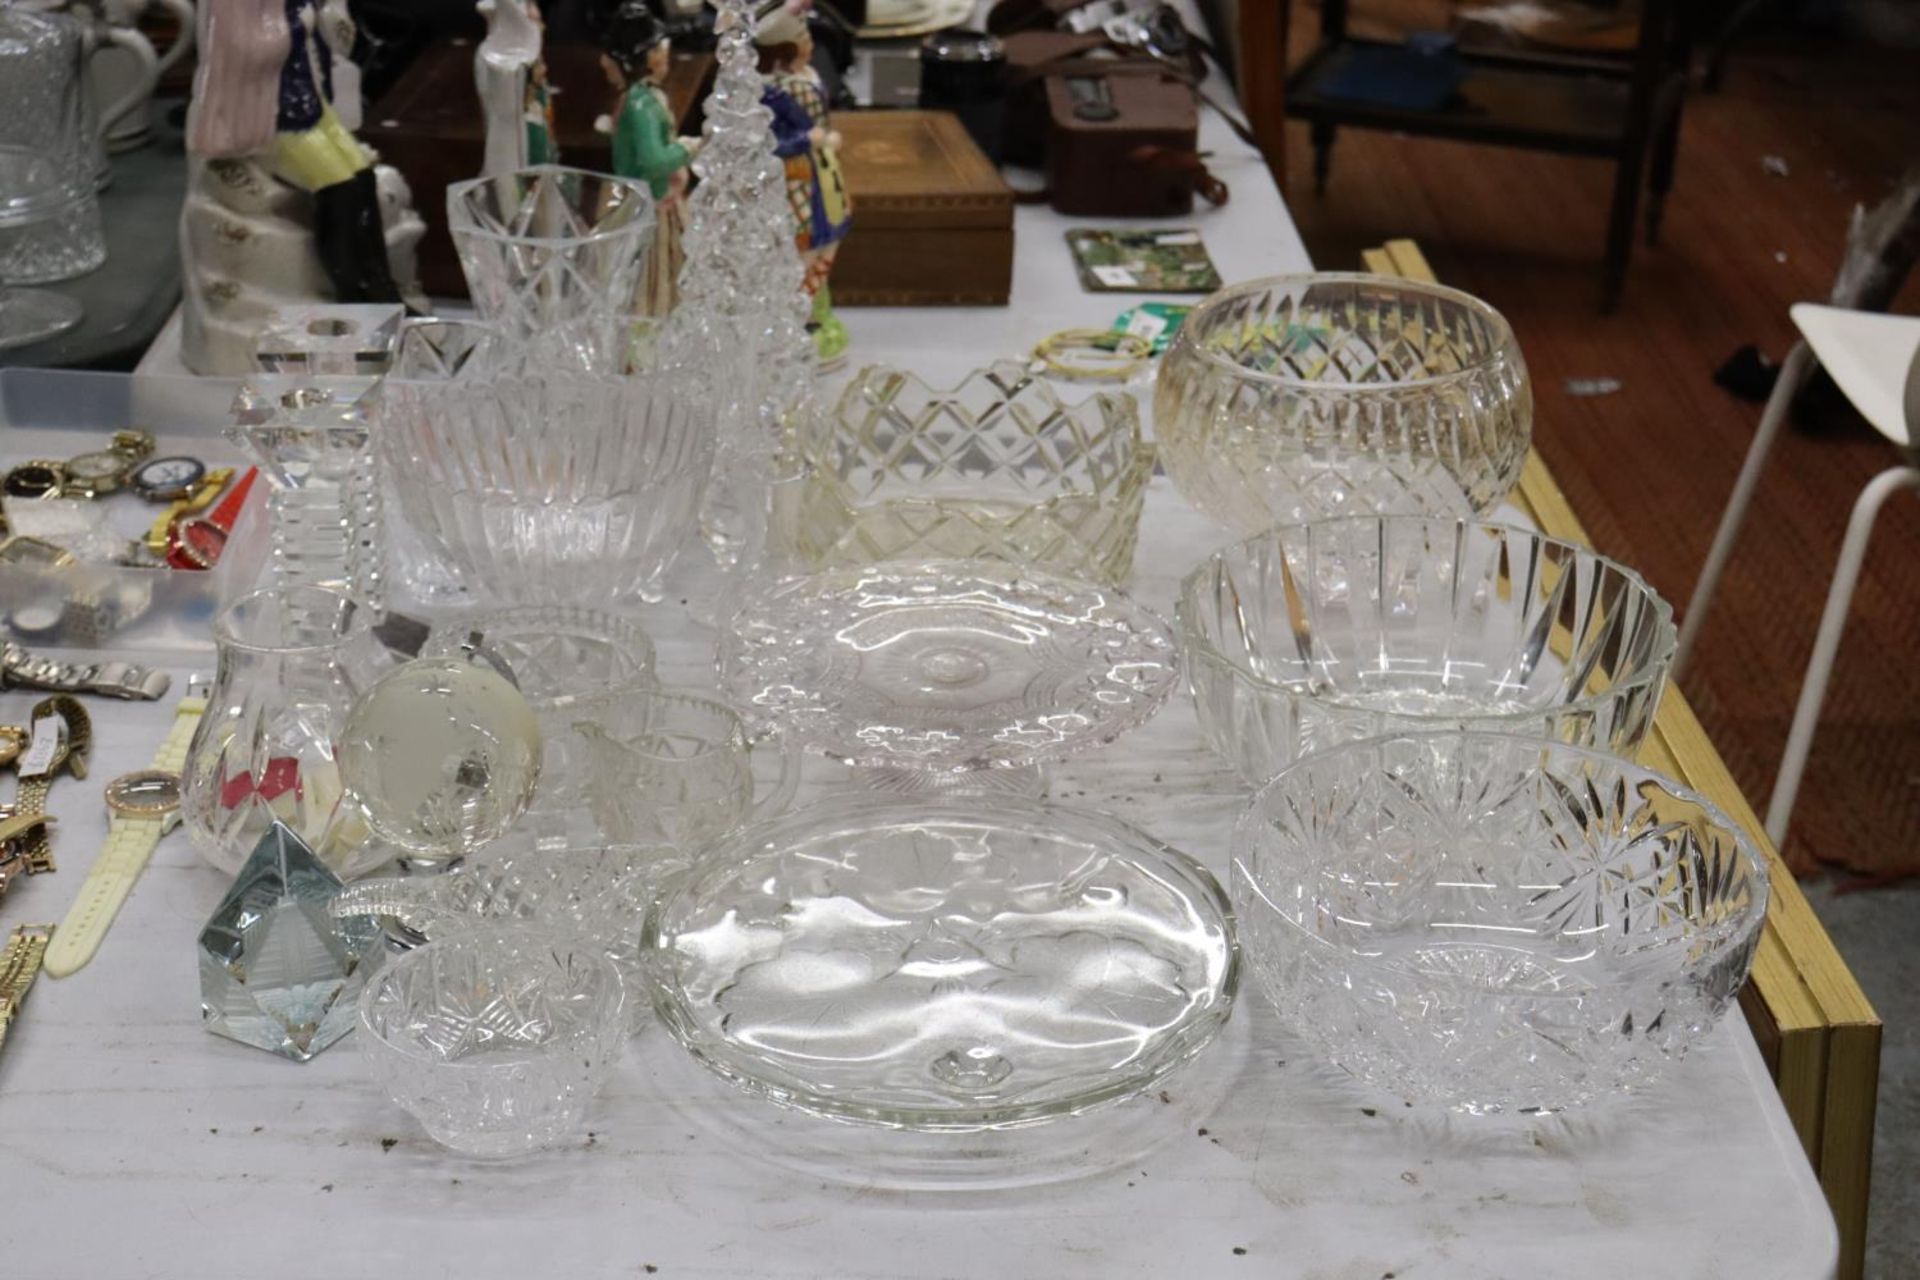 A LARGE QUANTITY OF GLASSWARE TO INCLUDE LARGE BOWLS, VASES, CANDLESTICKS, A GLOBE, ETC